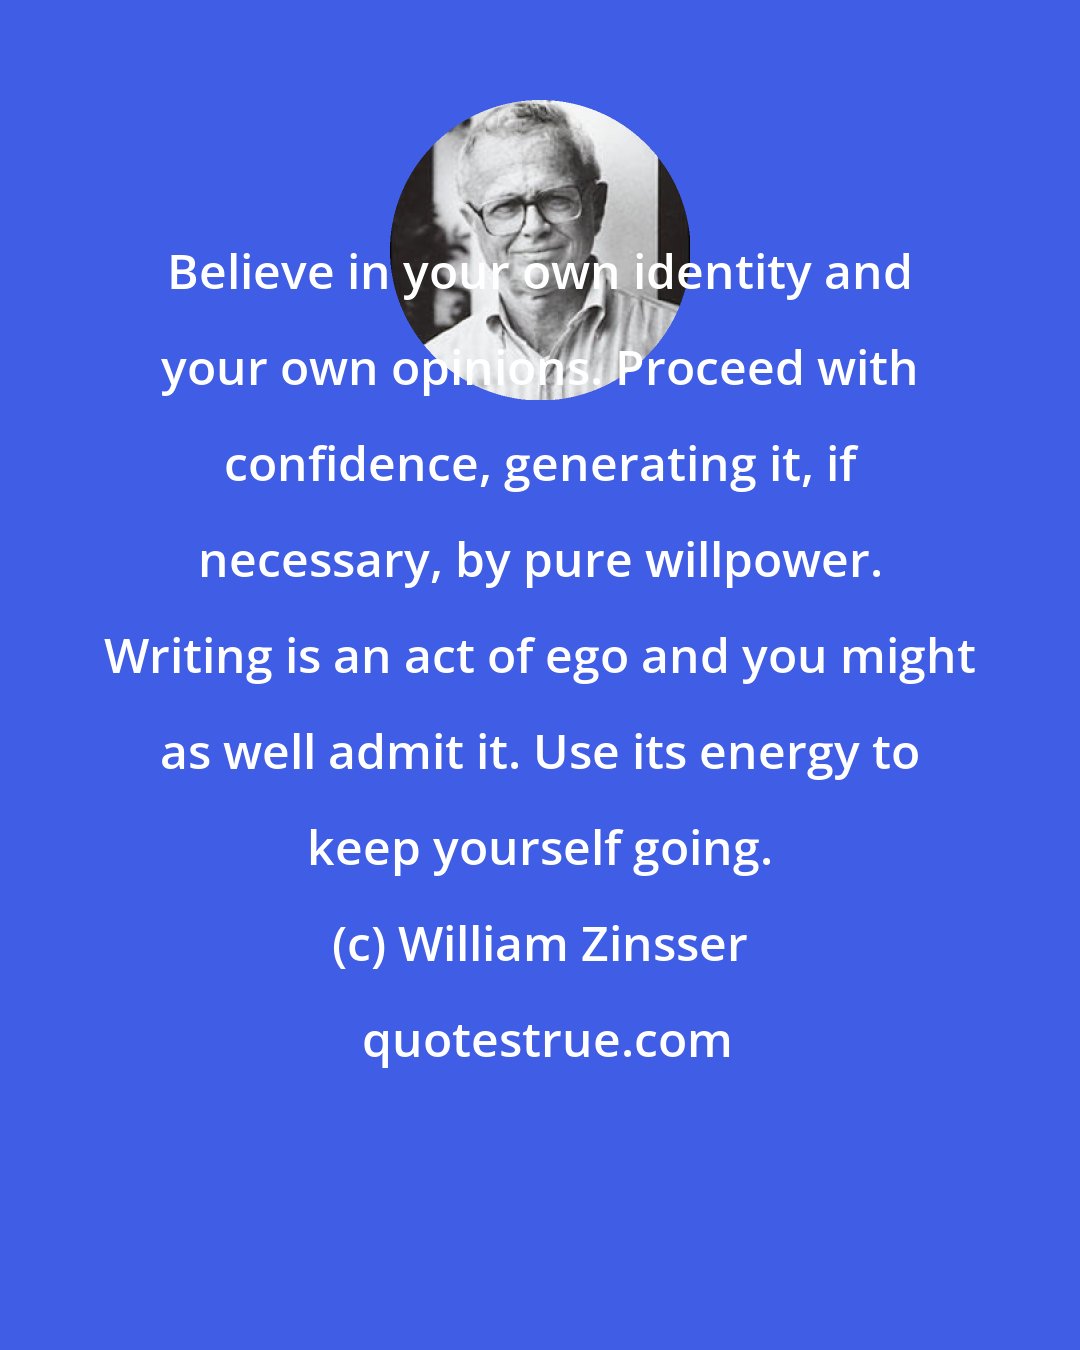 William Zinsser: Believe in your own identity and your own opinions. Proceed with confidence, generating it, if necessary, by pure willpower. Writing is an act of ego and you might as well admit it. Use its energy to keep yourself going.